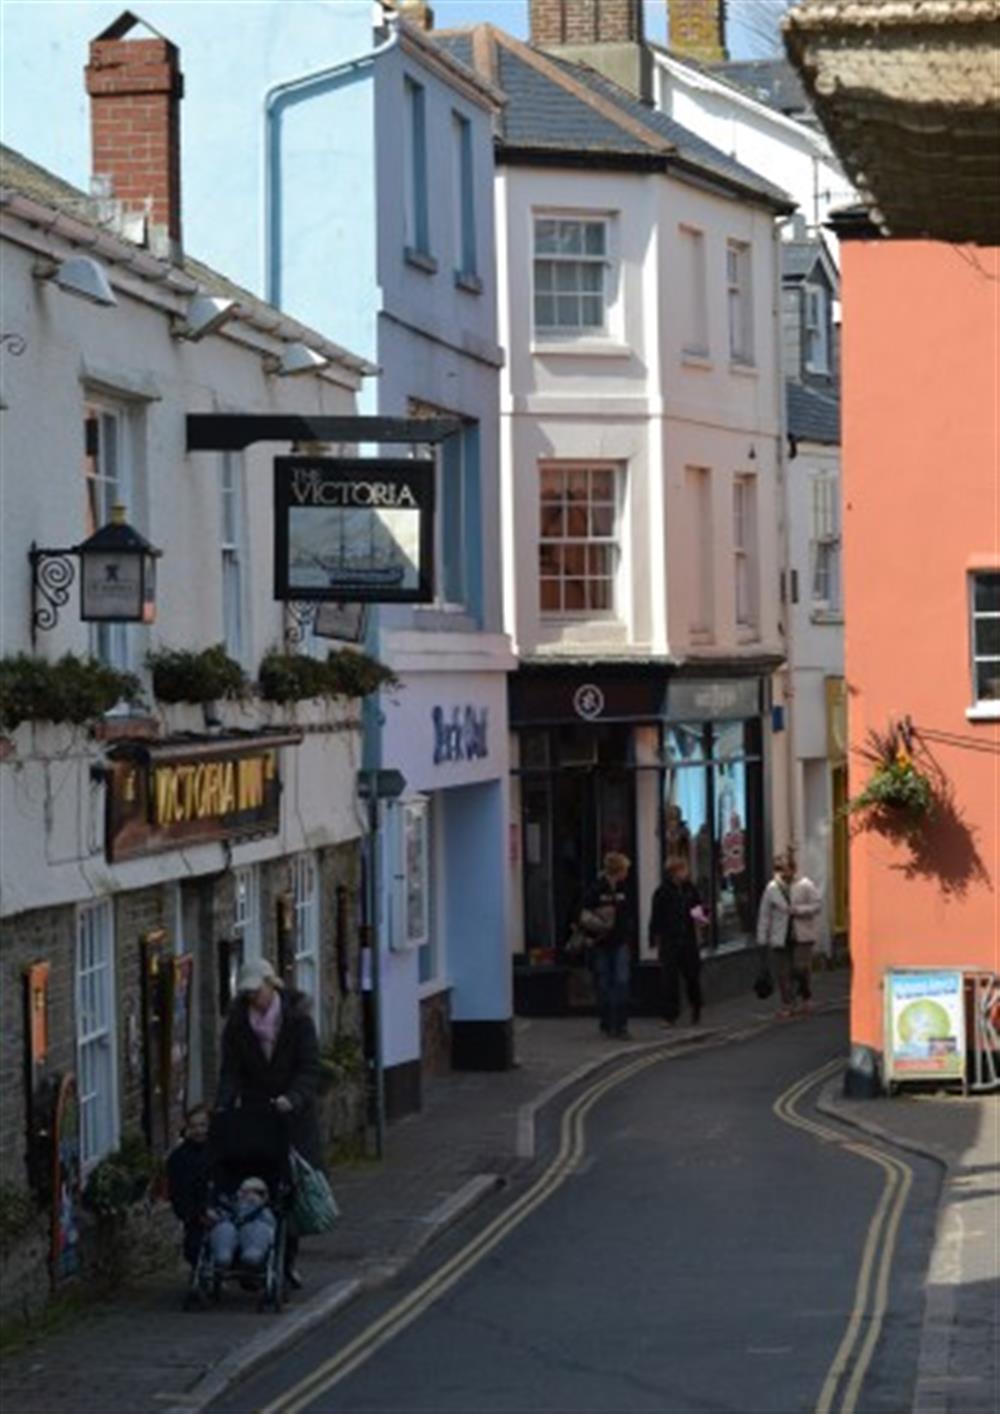 A great selection of pubs. restaurants and shops all within easy walking distance